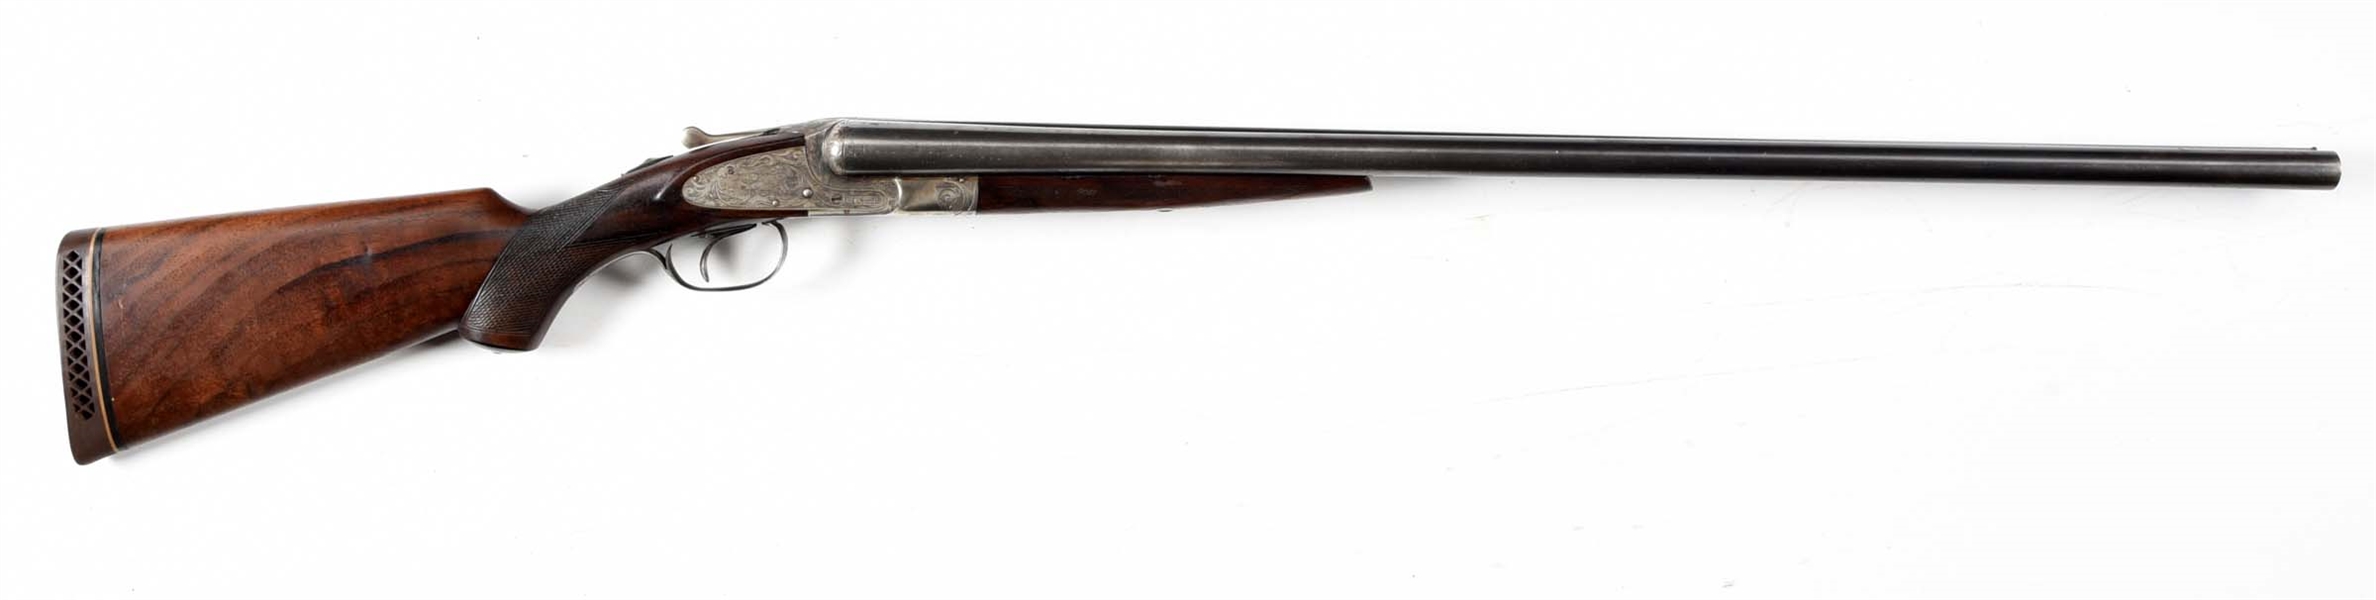 (C) LC SMITH SPECIALTY GRADE 12 BORE SIDE BY SIDE SHOTGUN.